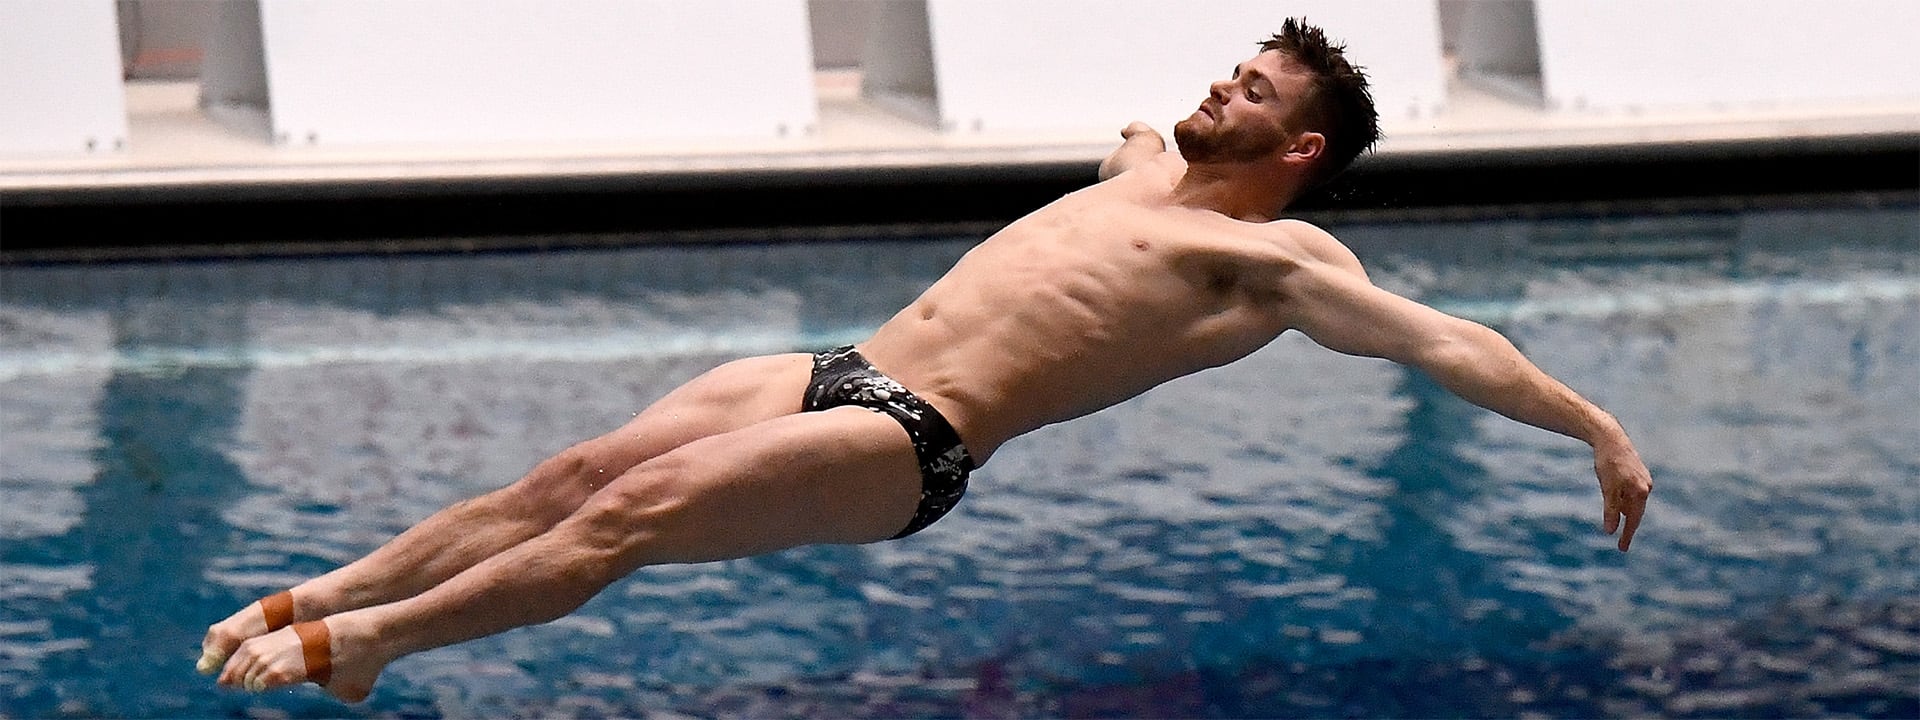 Olympic Athlete David Boudia Opens Up About His Journey